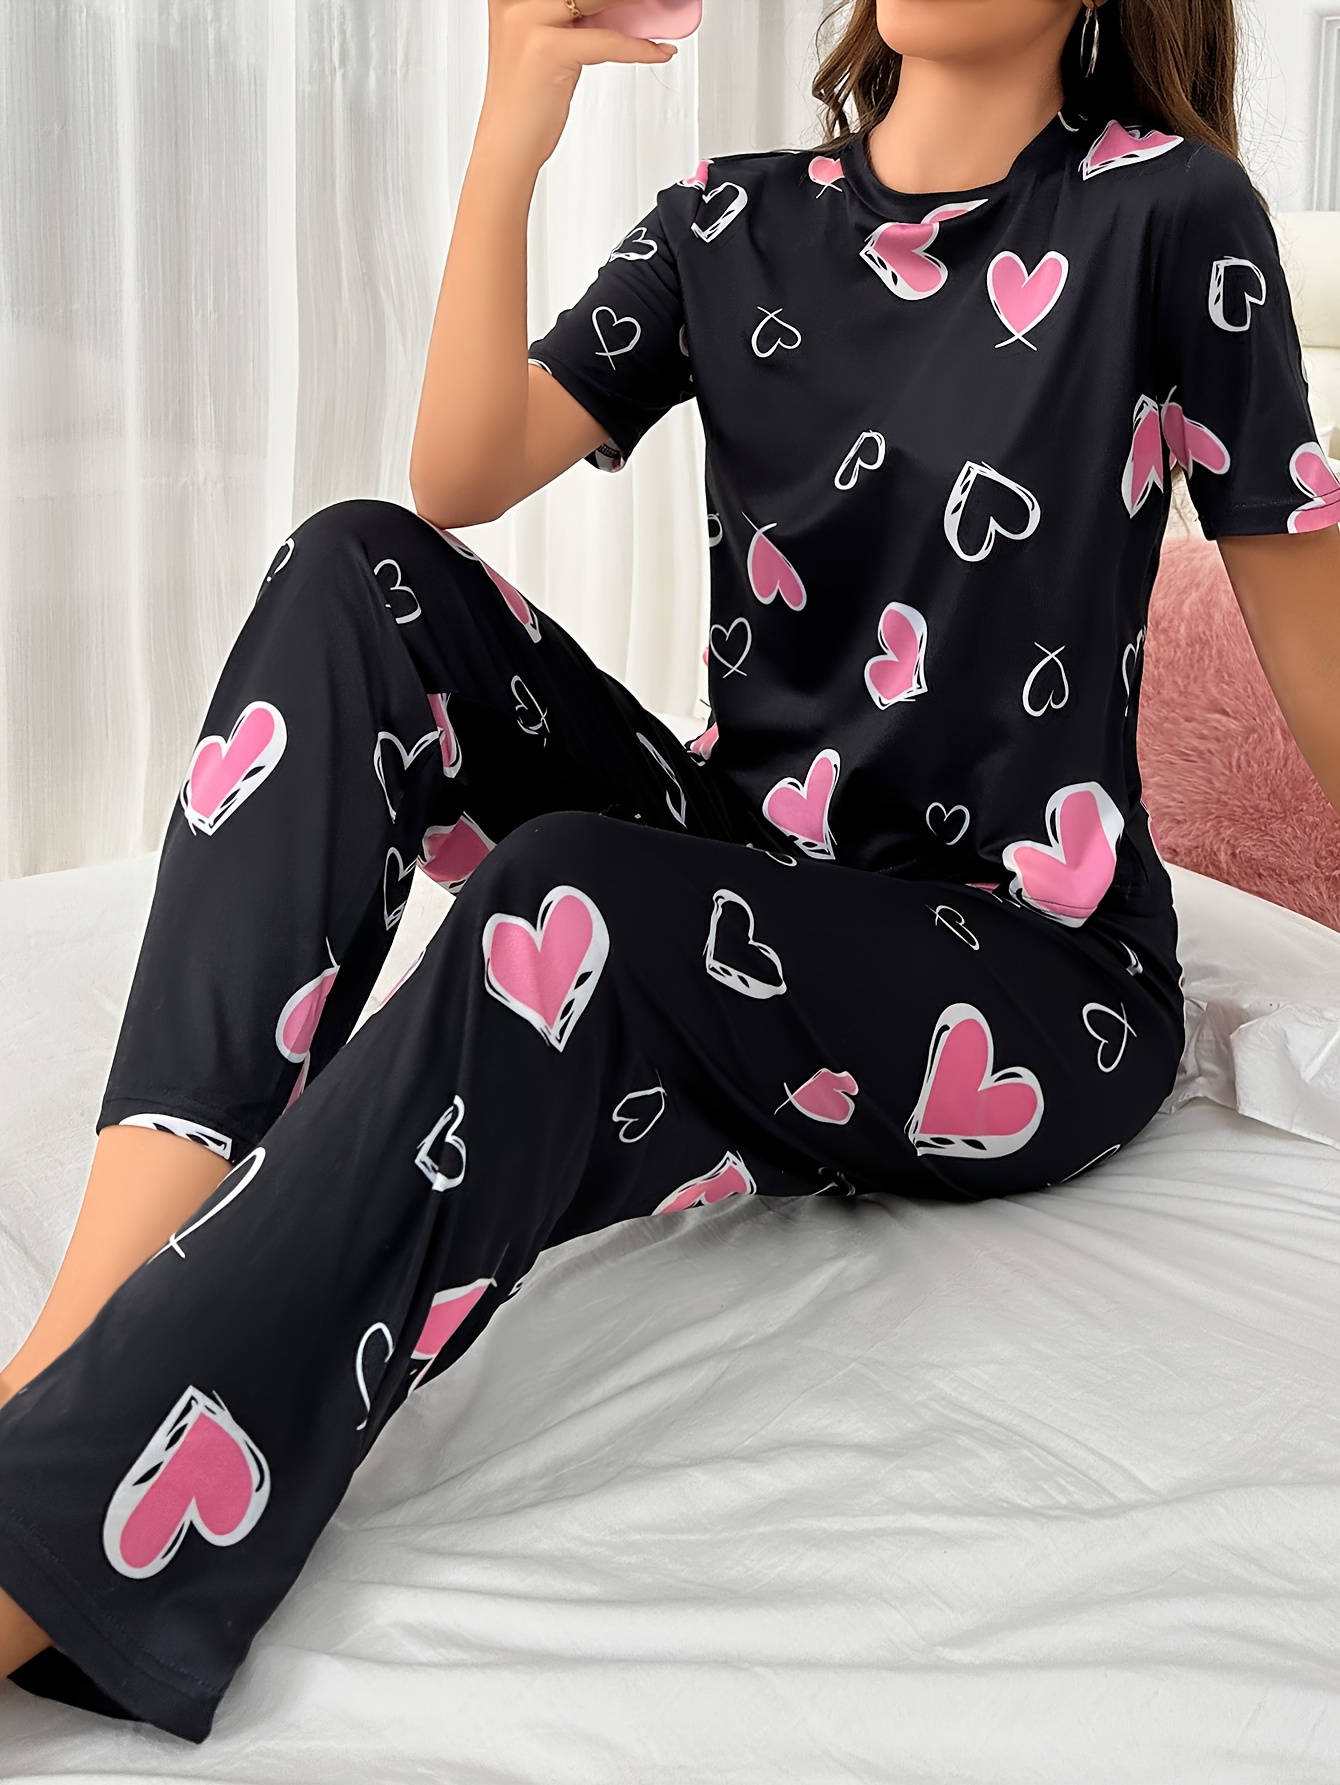 Sleepover Pajamas Women Galentine's Day Pajamas Shirts for Women Sleep  Shirts Monogram Pajamas Valentine Gifts for Friends (EB3314M)